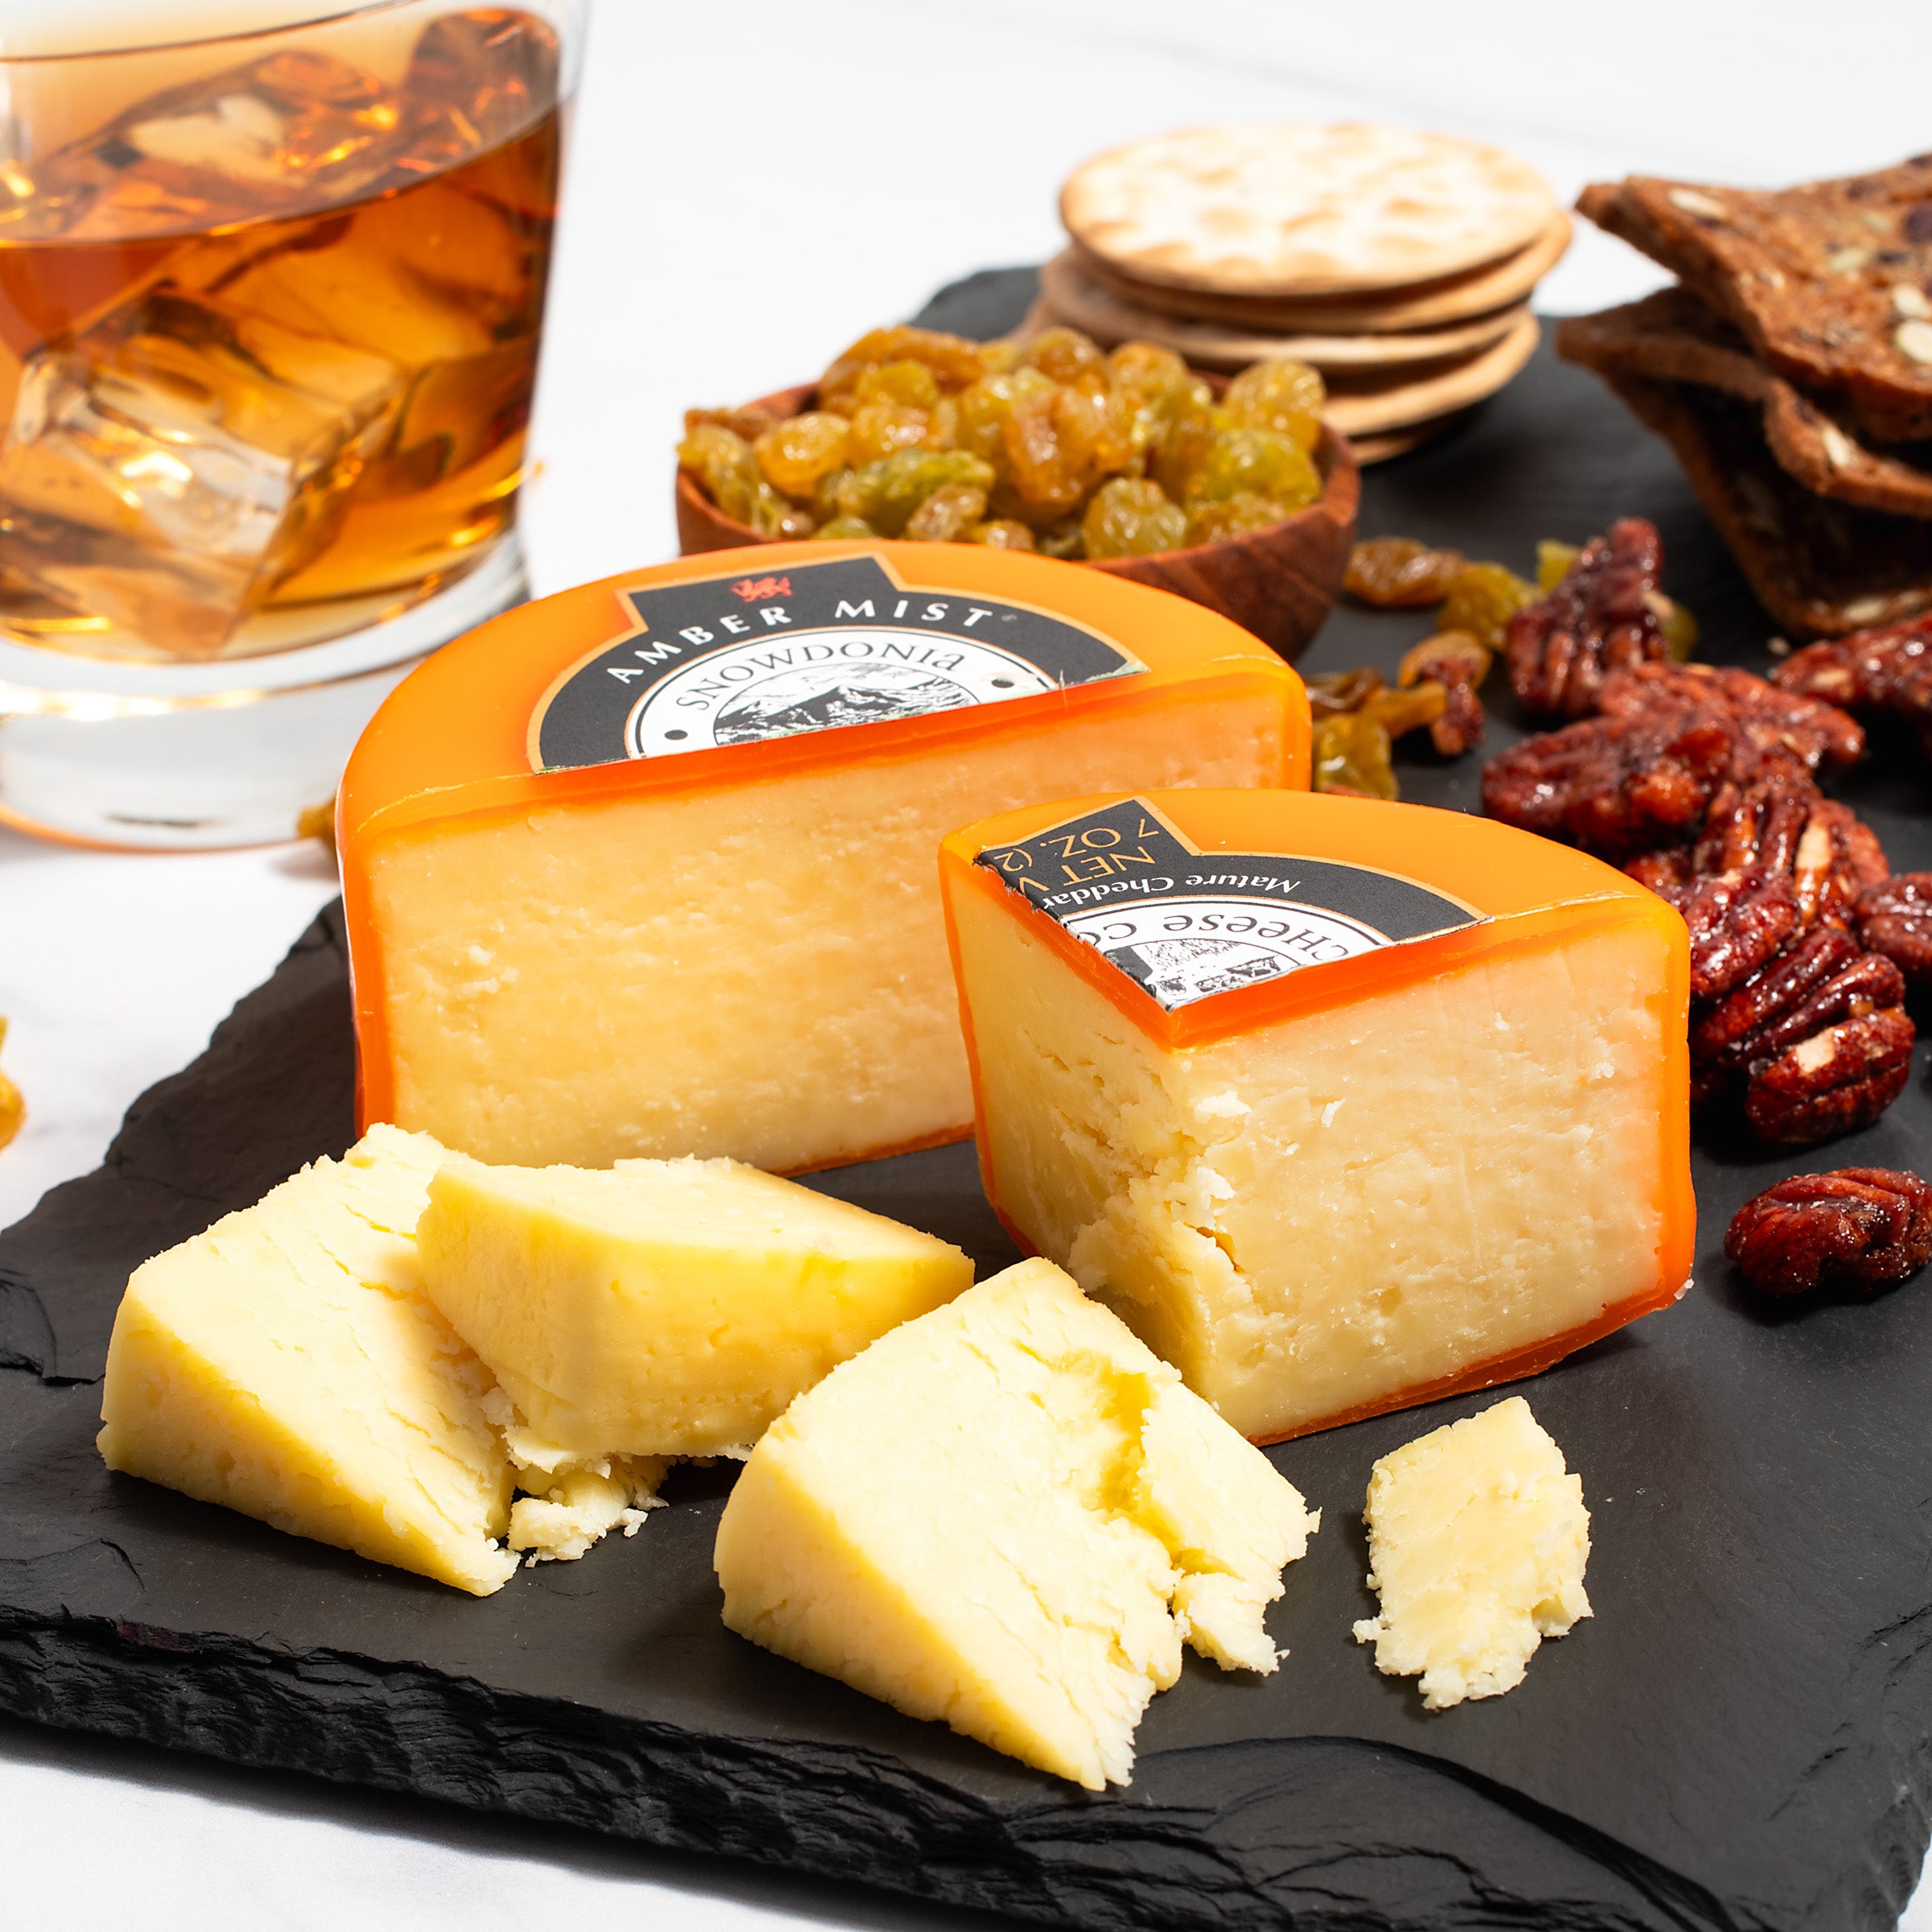 igourmet_2449-3_Amber Mist Welsh Truckle Cheese - Mature Cheddar with Whisky_Snowdonia_Cheese